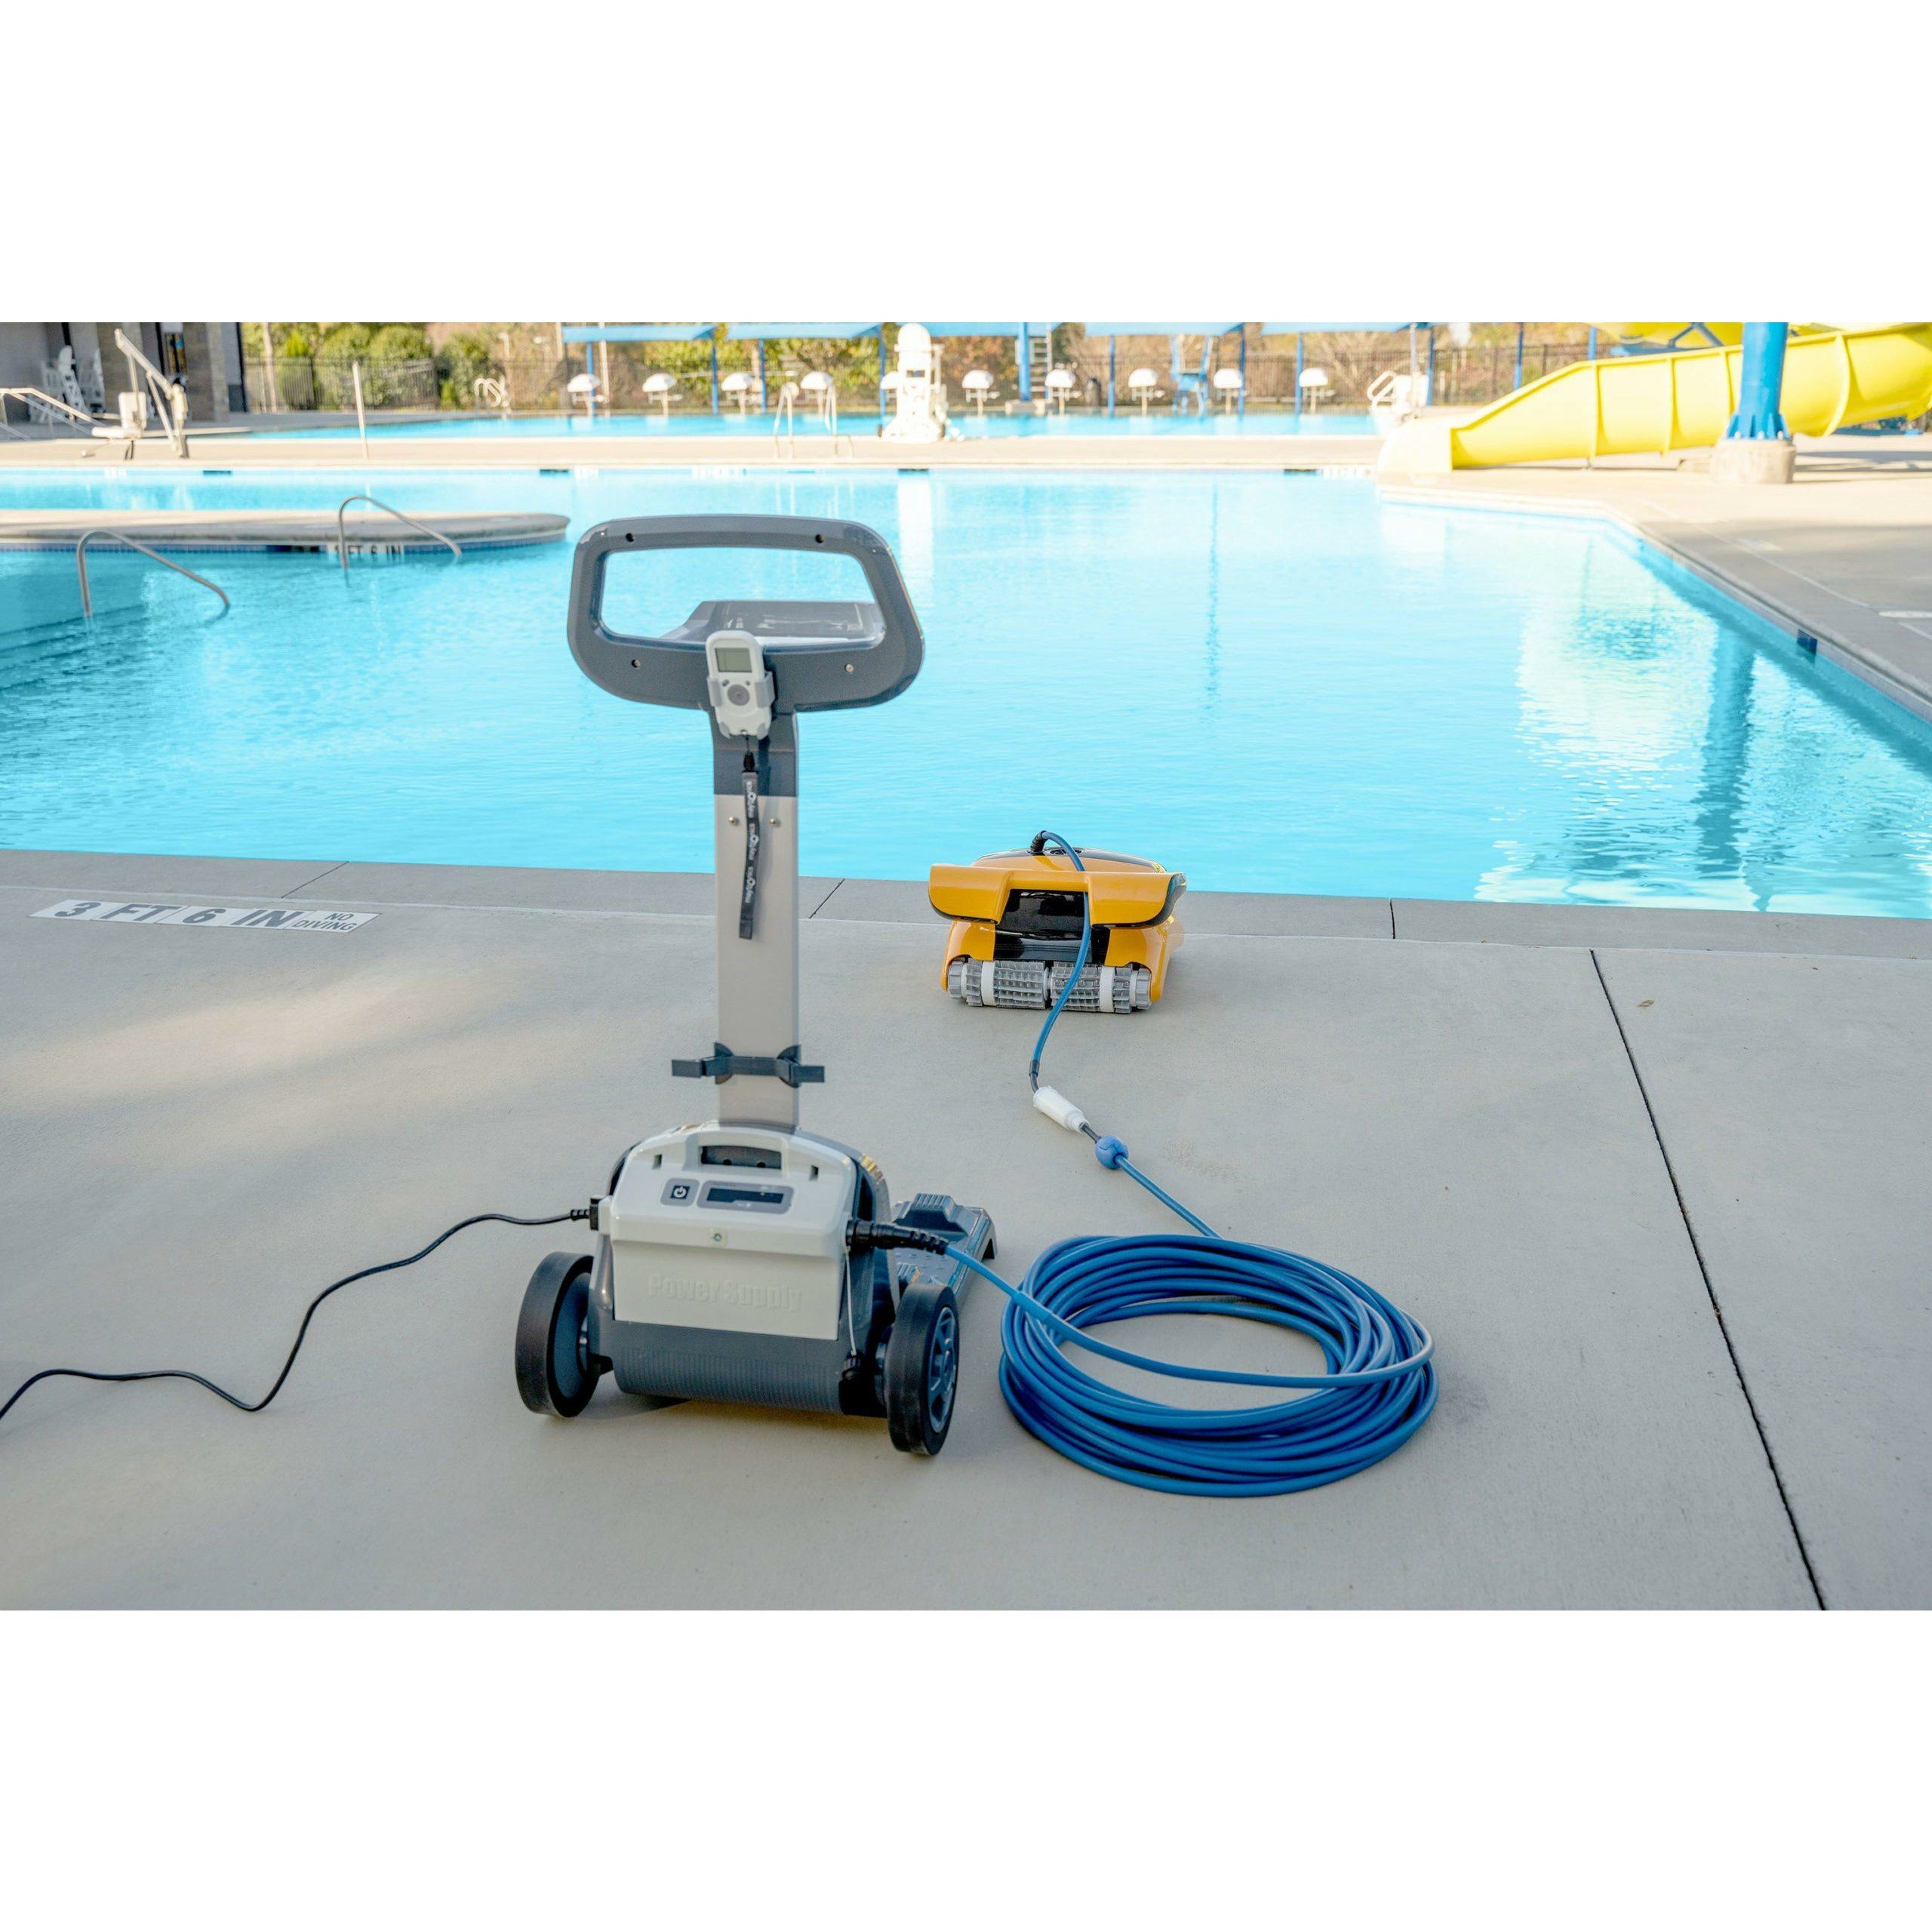 Commercial Pool Dolphin Wave 80 Robotic Cleaner - Pelican Shops